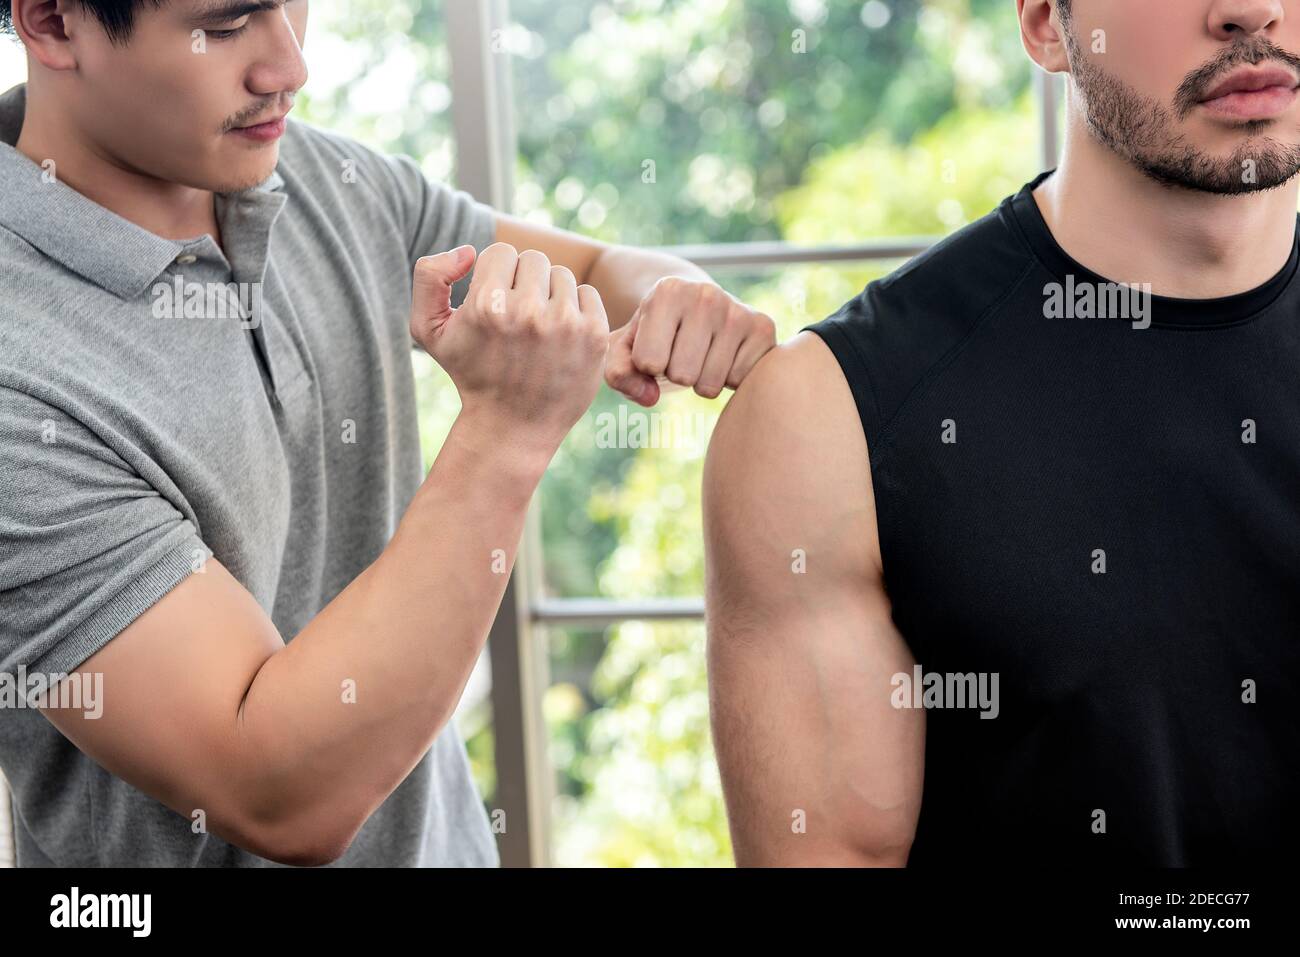 Therapist giving massage to athlete male patient by beating and pounding techniques in clinic, sports physical therapy concept Stock Photo